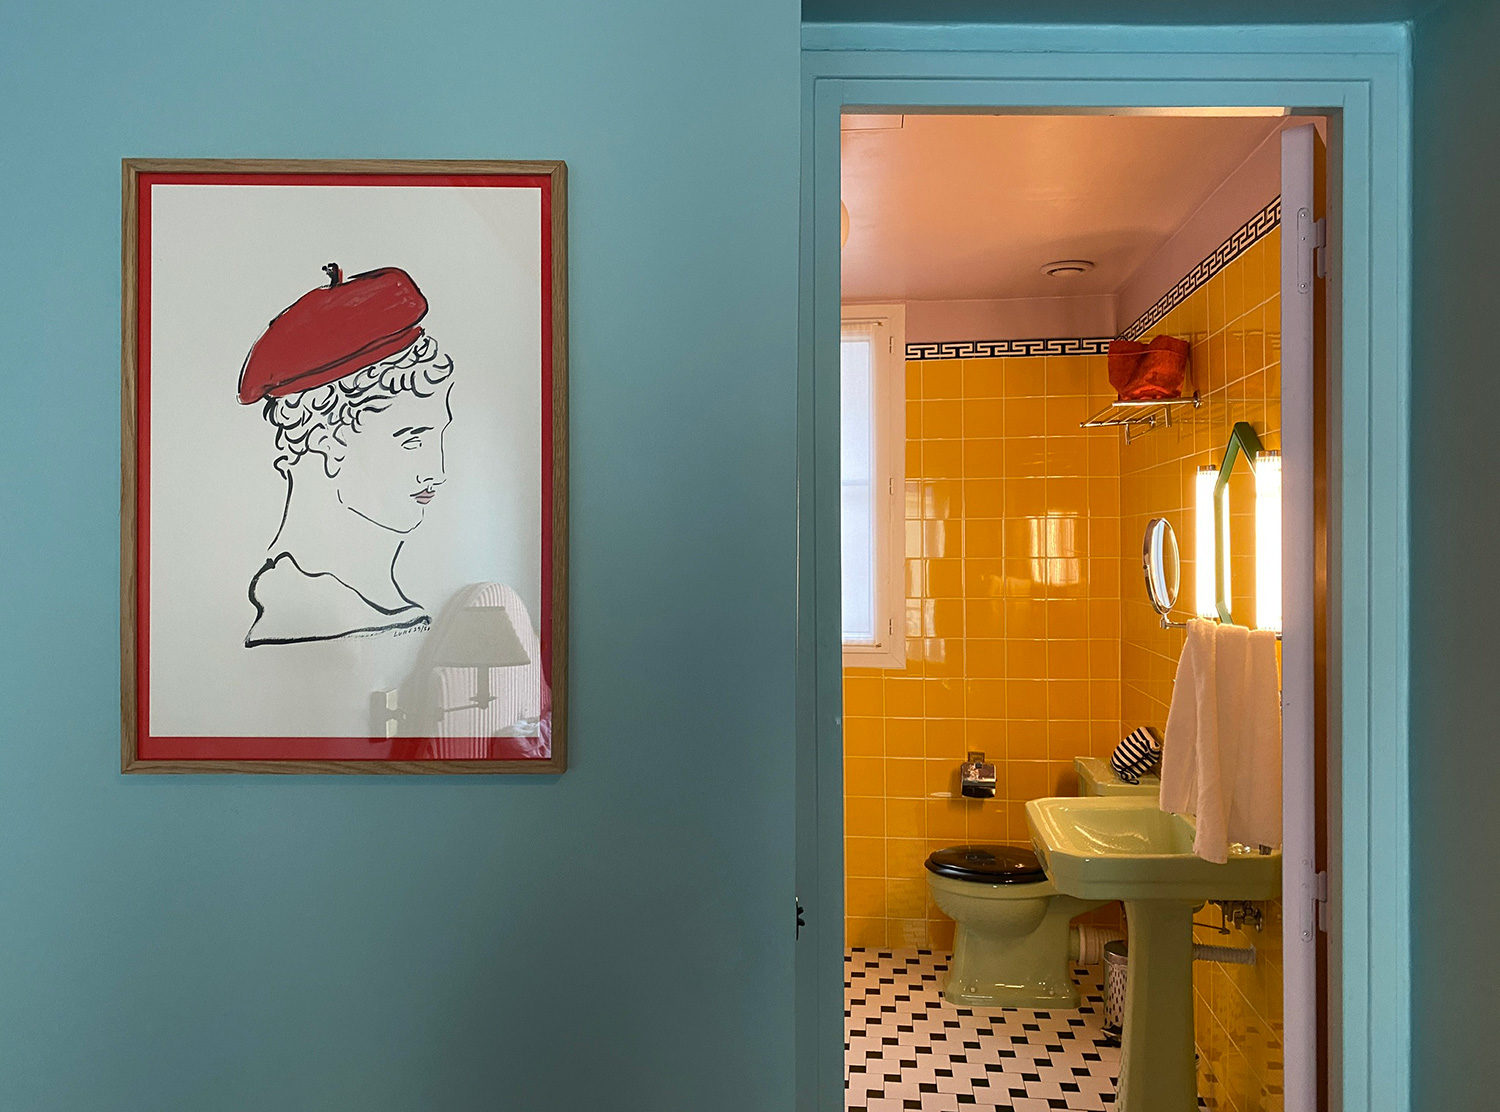 Hotel Les Deux Gares In every corner, a quirky mash-up of eras and a wellspring of artistic and intellectual references